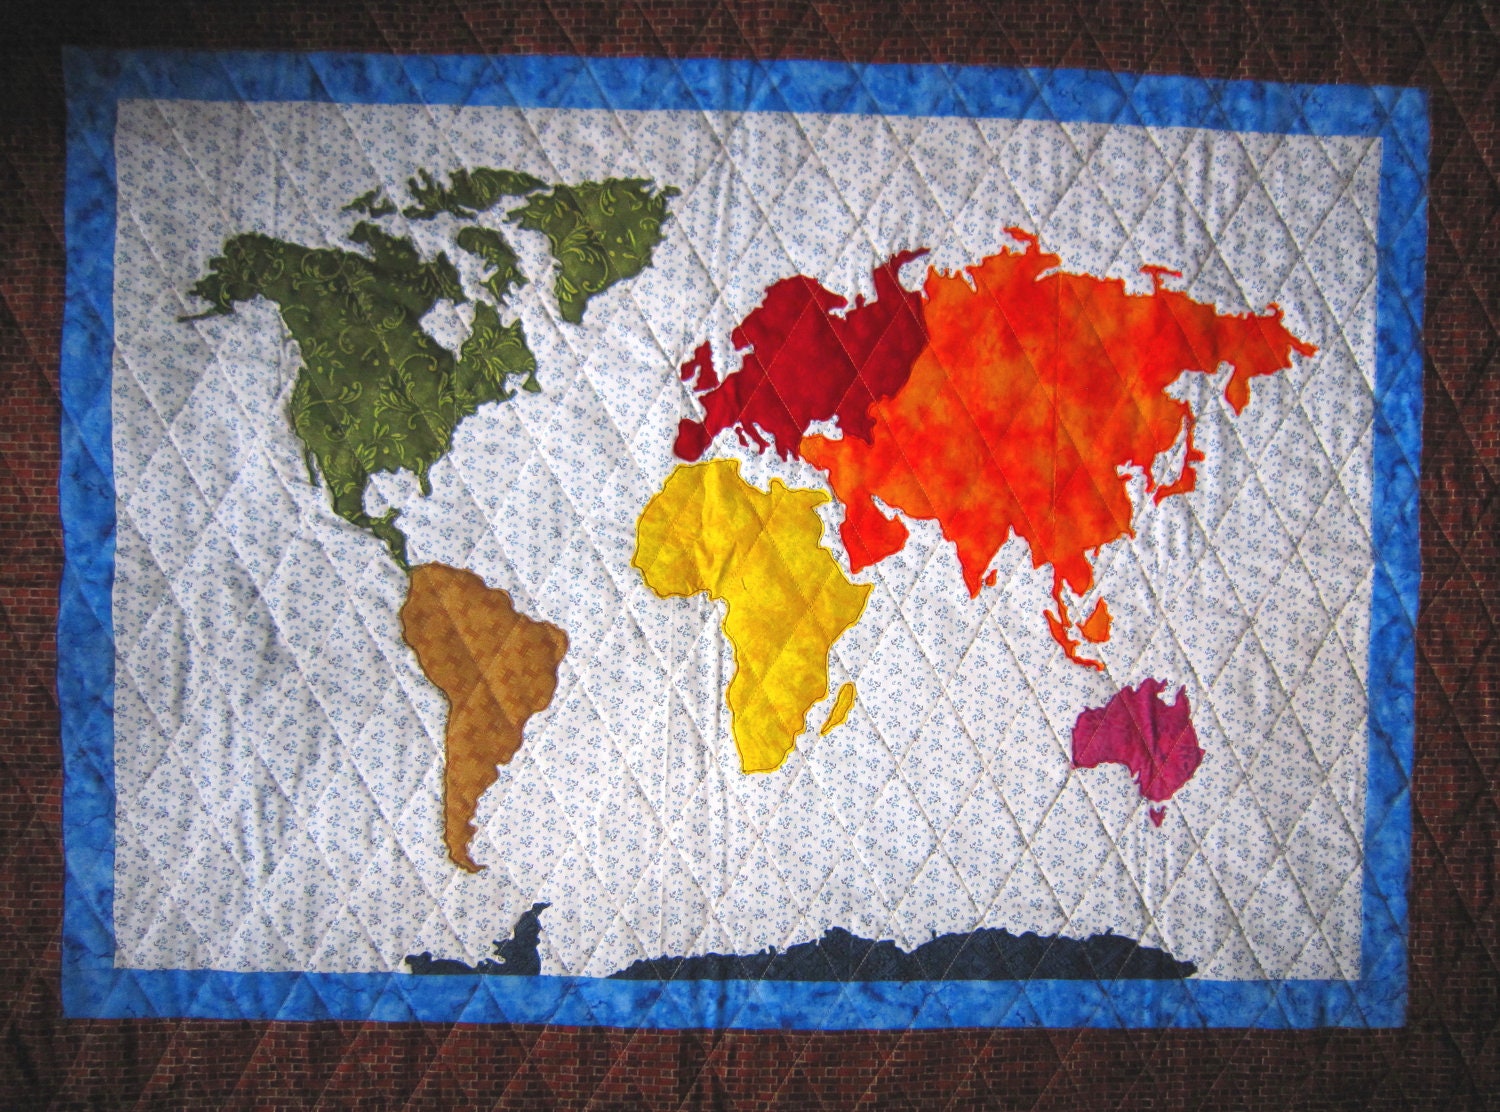 OUR WORLD Patchwork Map Quilt Pattern Full Sized Templates And